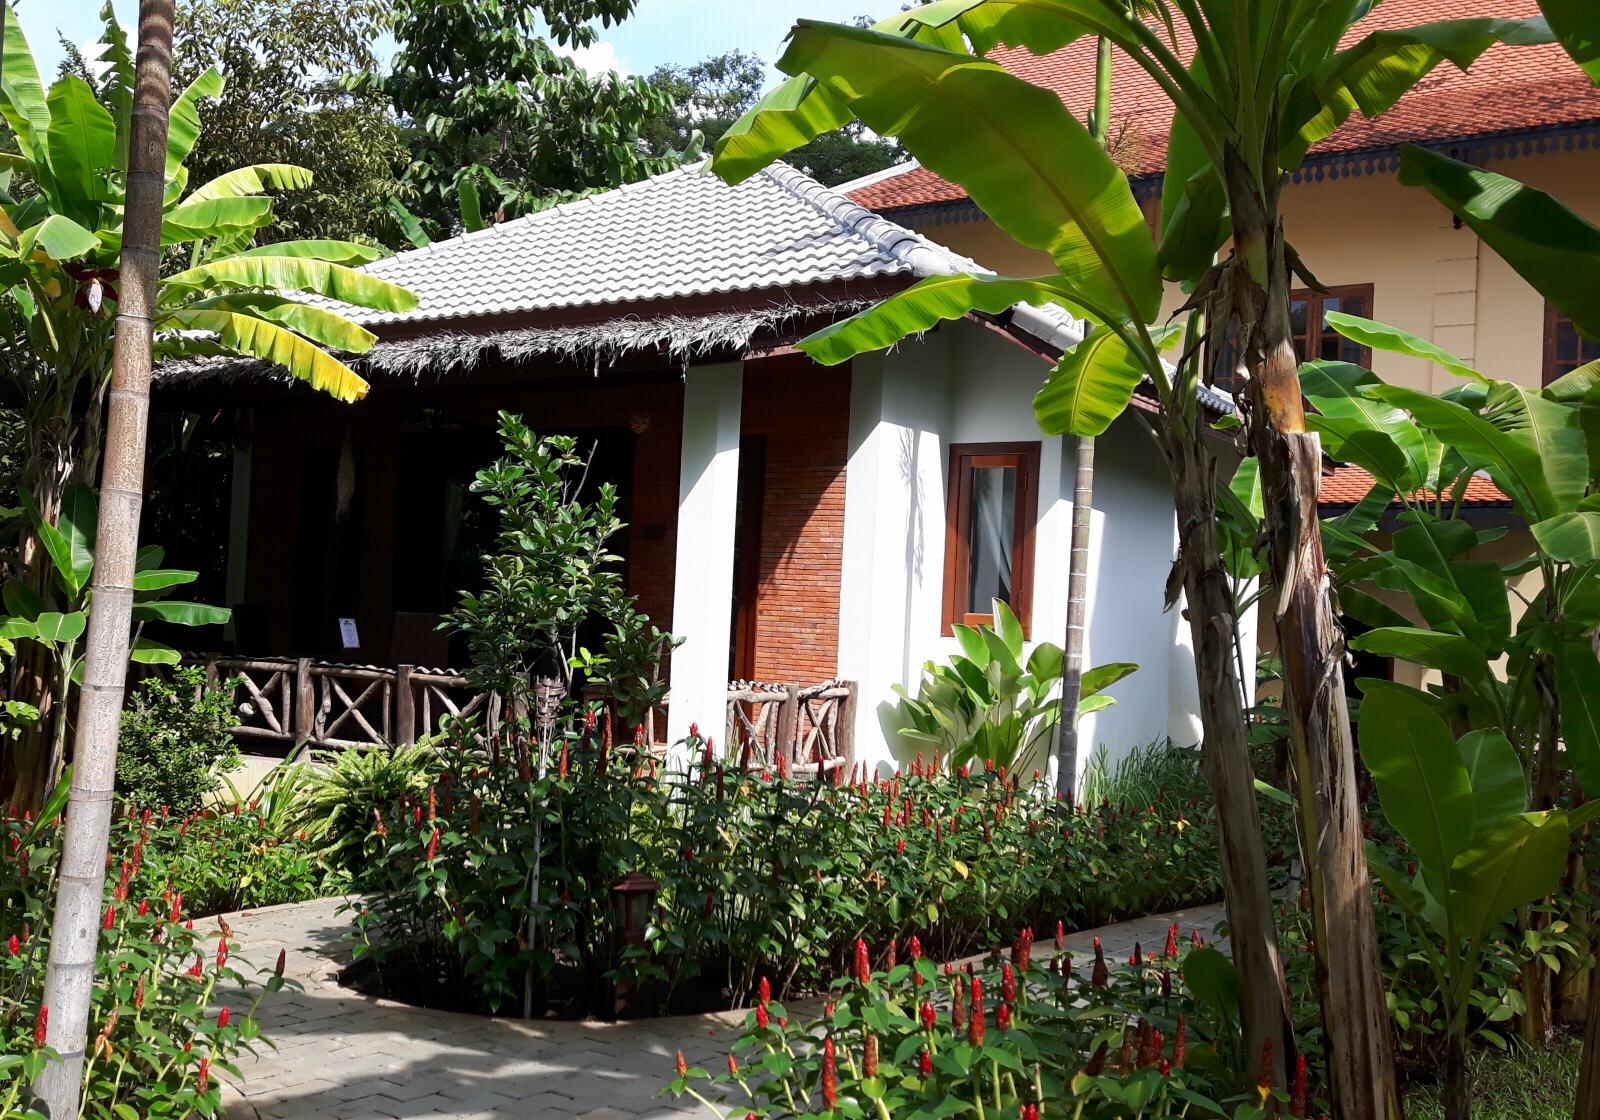 Our bungalow in La Rivire D'Angkor hotel, Siem Reap